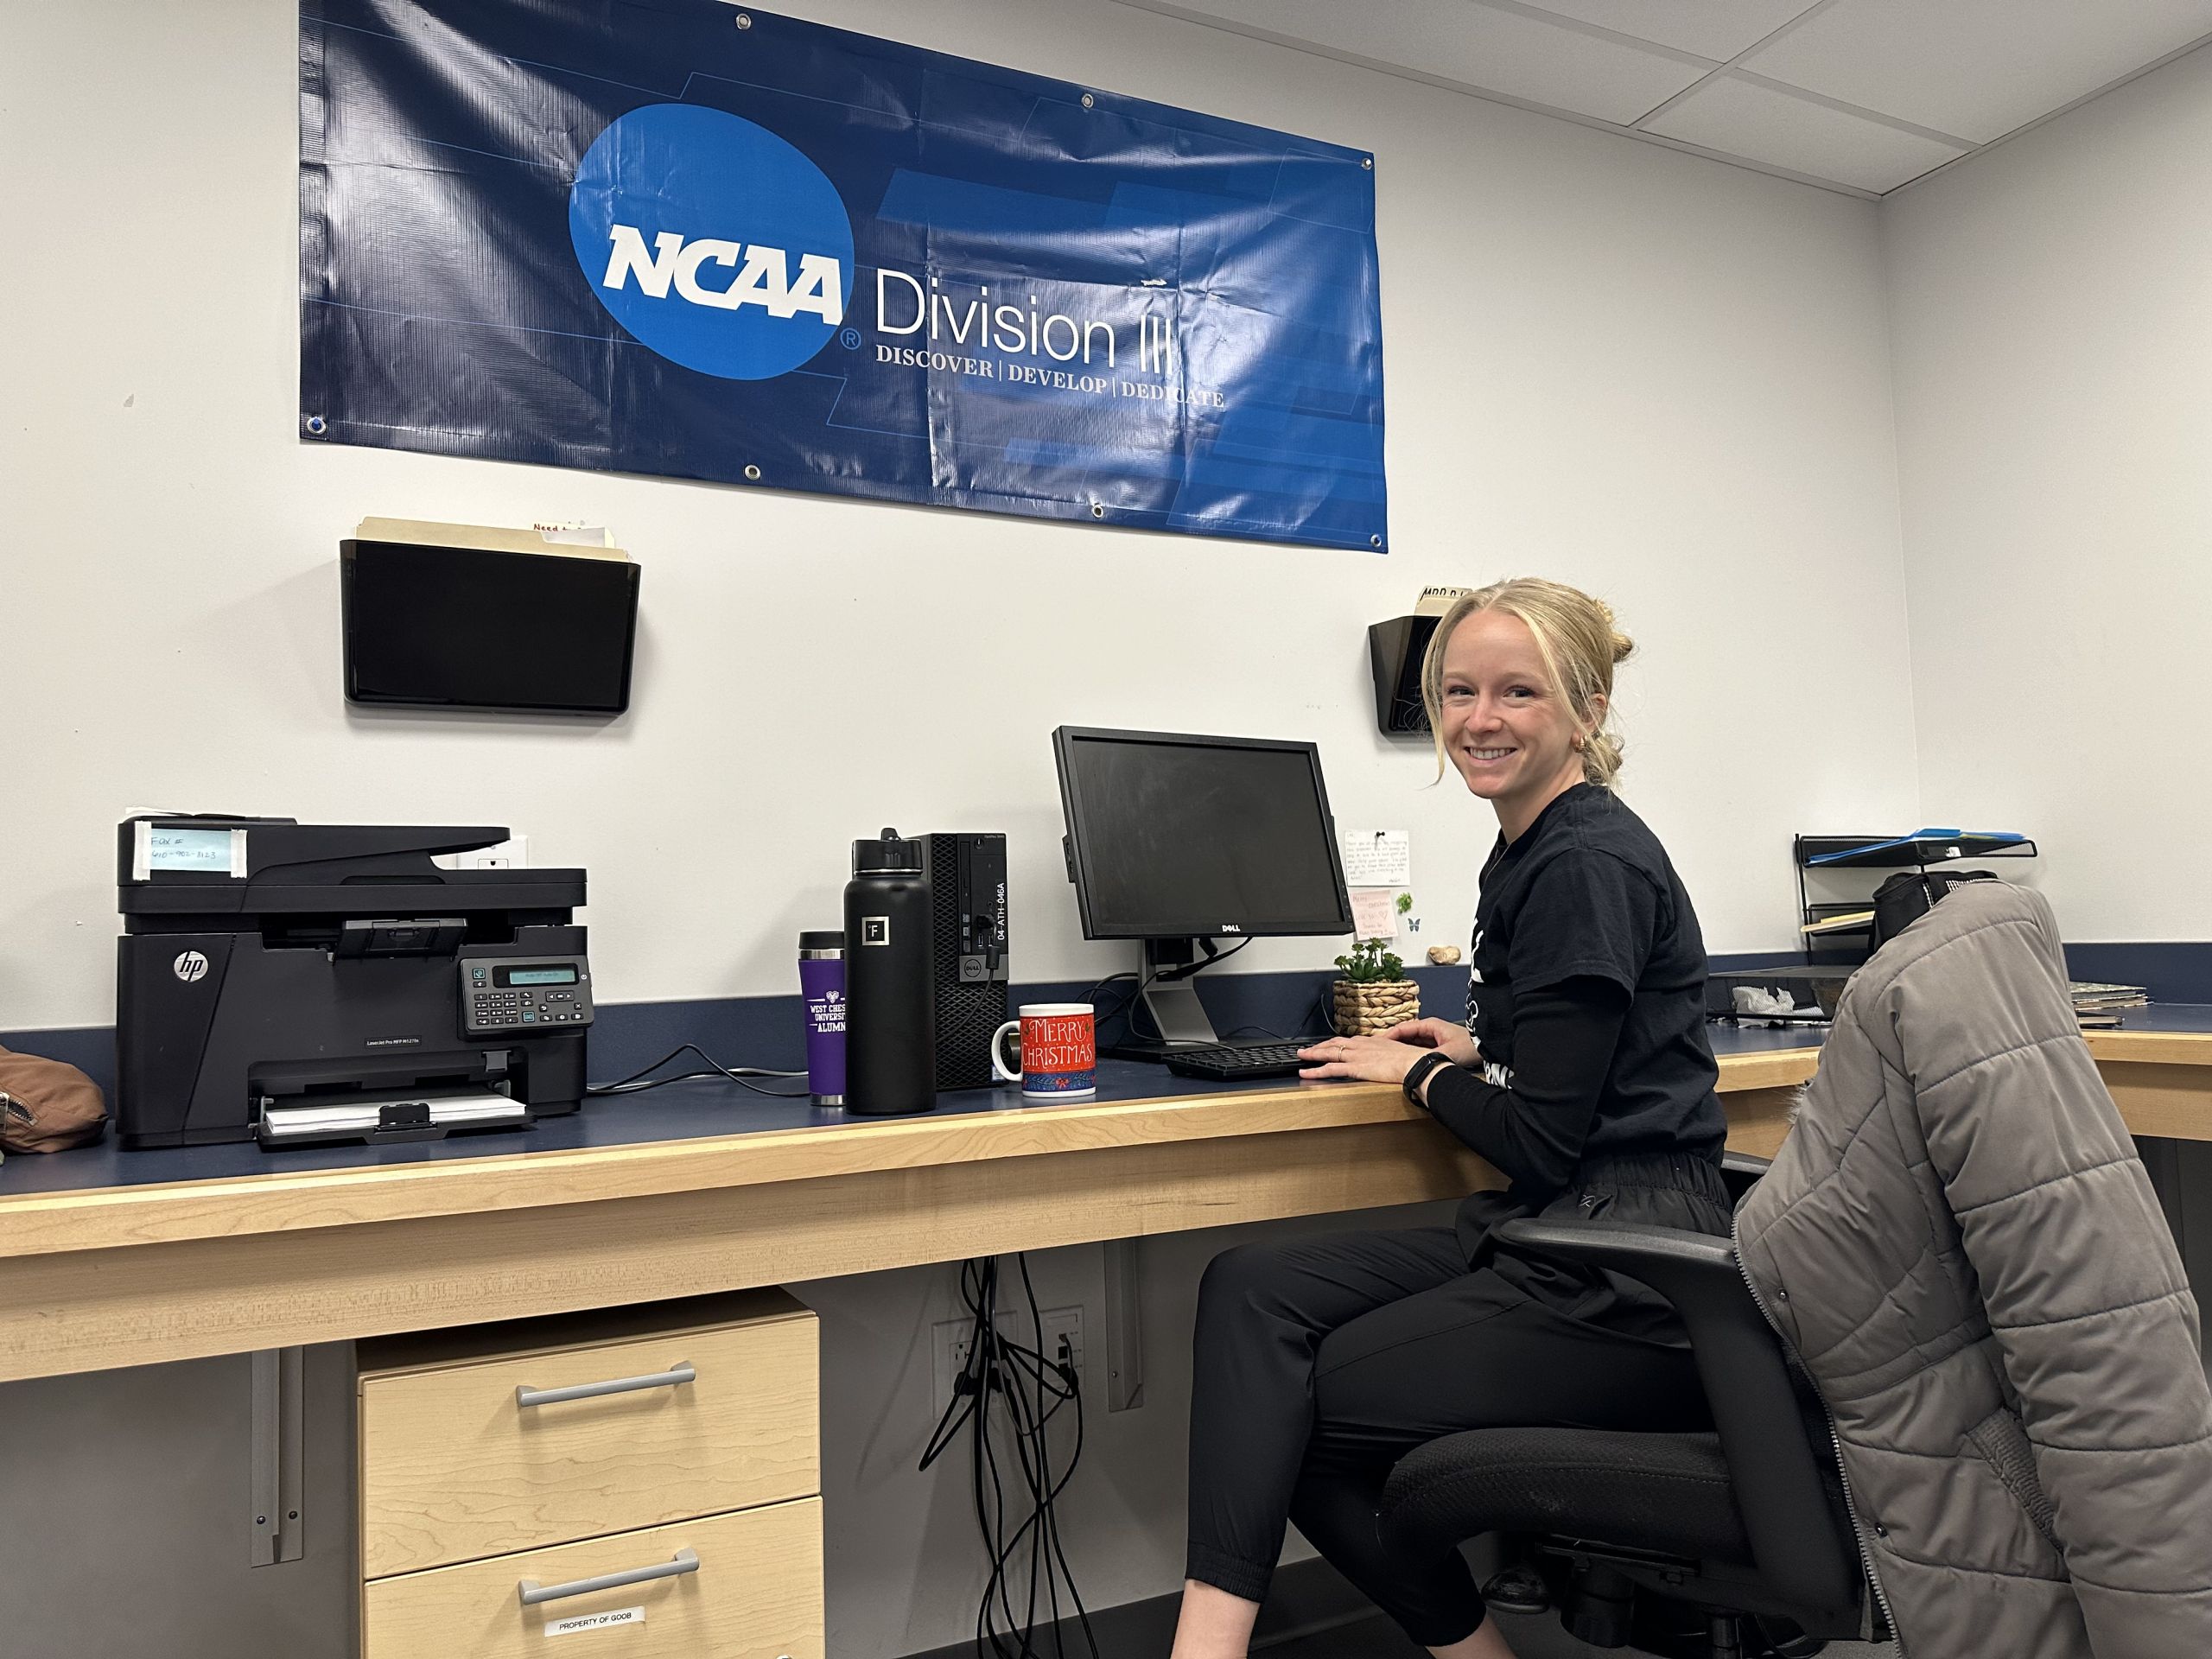 Lea Blackburn is the new head athletic trainer for Cabrini athletics. She is stepping into a major role supporting student athletes in their final campaigns. Photo by Jason Fridge